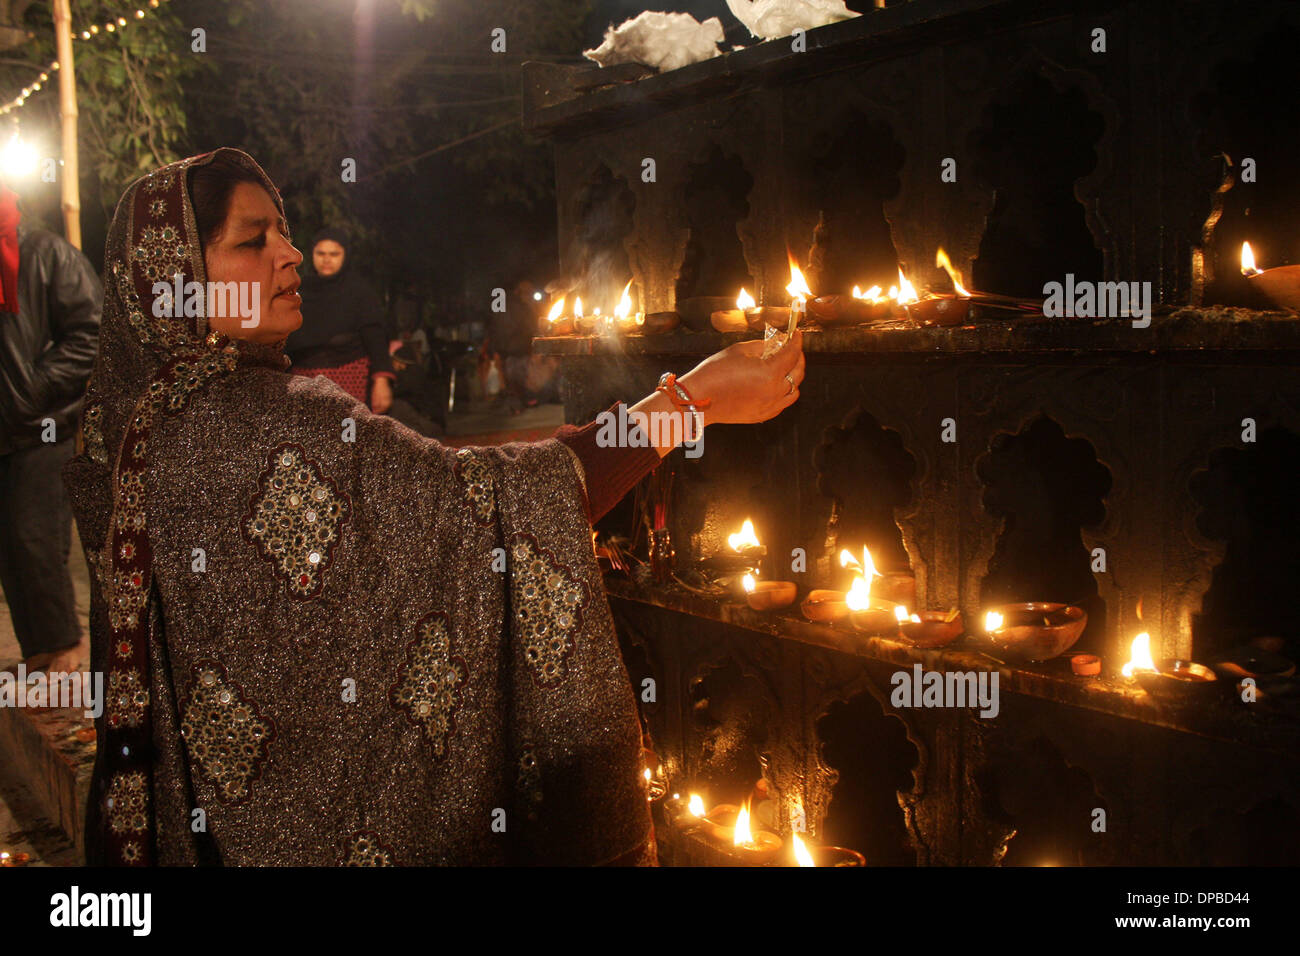 Lahore, Pakistan. 11th Jan, 2014. A Pakistani Muslim devotee lights oil lamps at the shrine of the Sufi saint Mian Mir Sahib during the last day of a three-day festival marking his 369th death anniversary in eastern Pakistan's Lahore on Jan. 11, 2014. Credit:  Jamil Ahmed/Xinhua/Alamy Live News Stock Photo